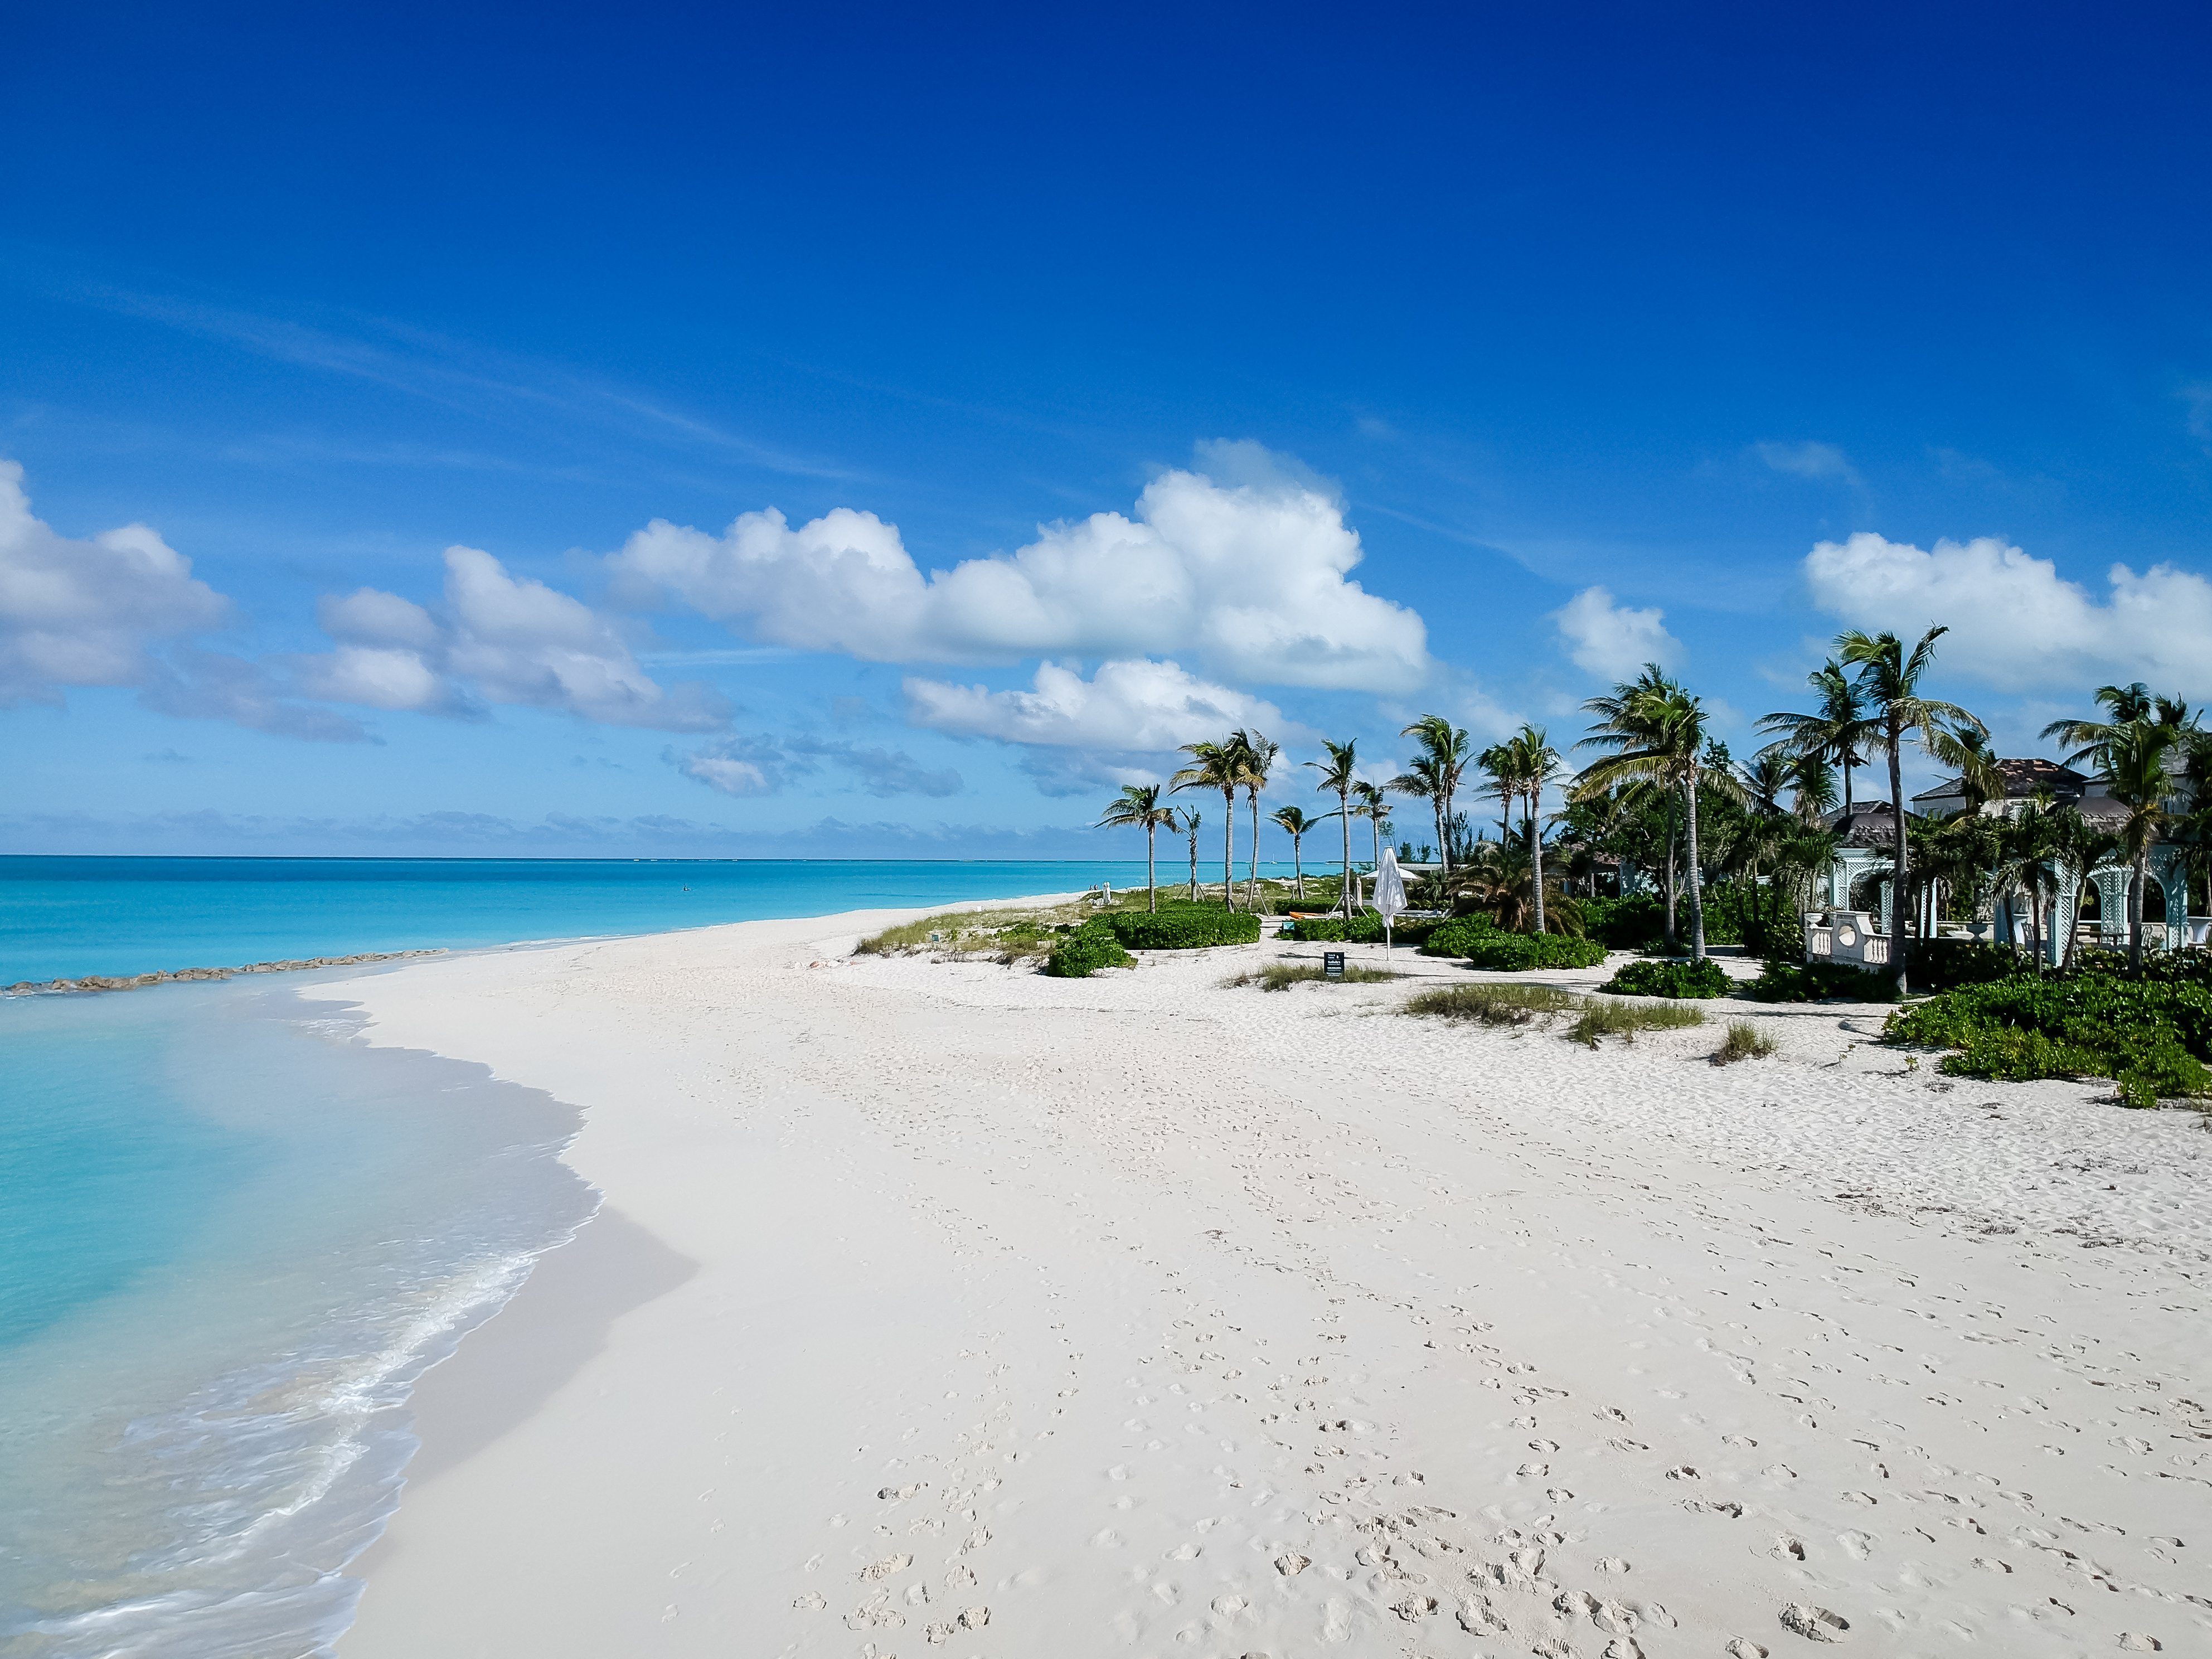 Best beaches in the world - Grace Bay